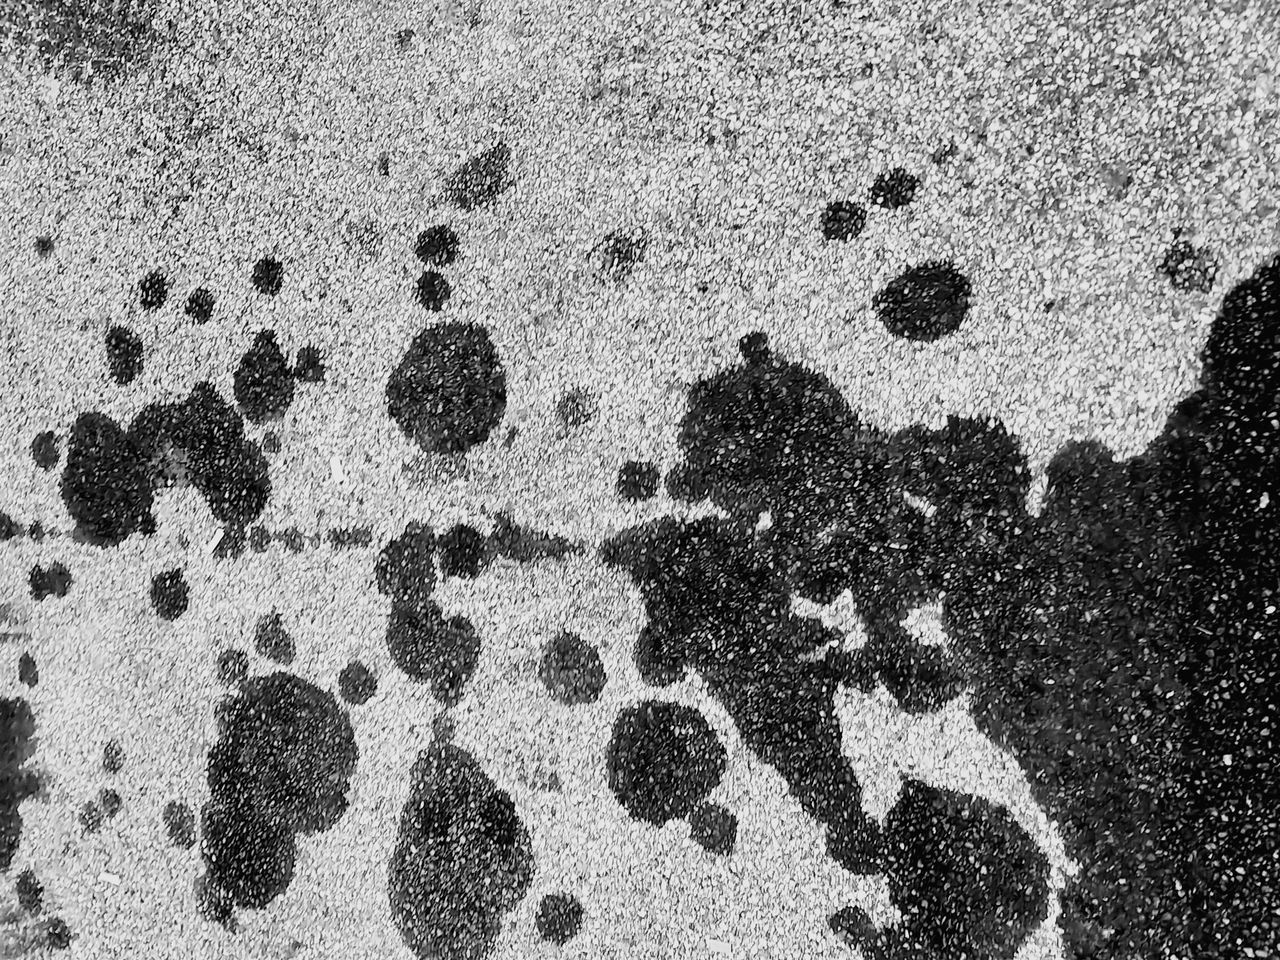 CLOSE-UP OF FOOTPRINTS ON SAND